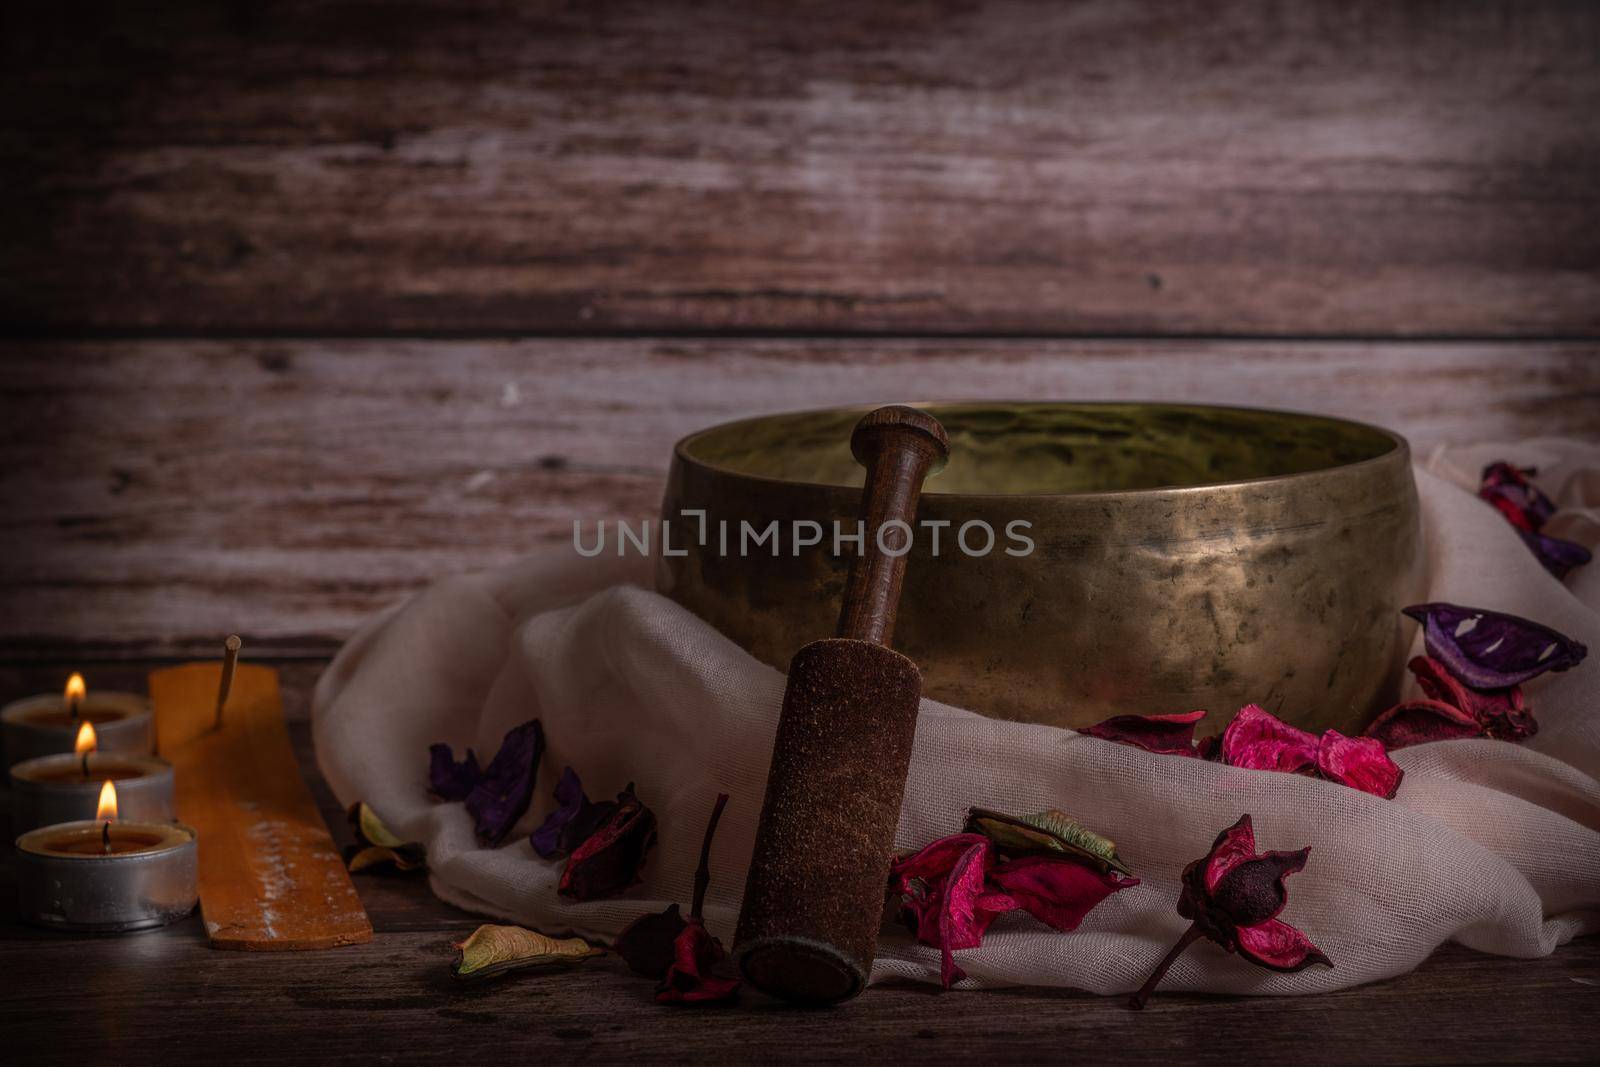 tibetan bowl with flower petals and candles by joseantona